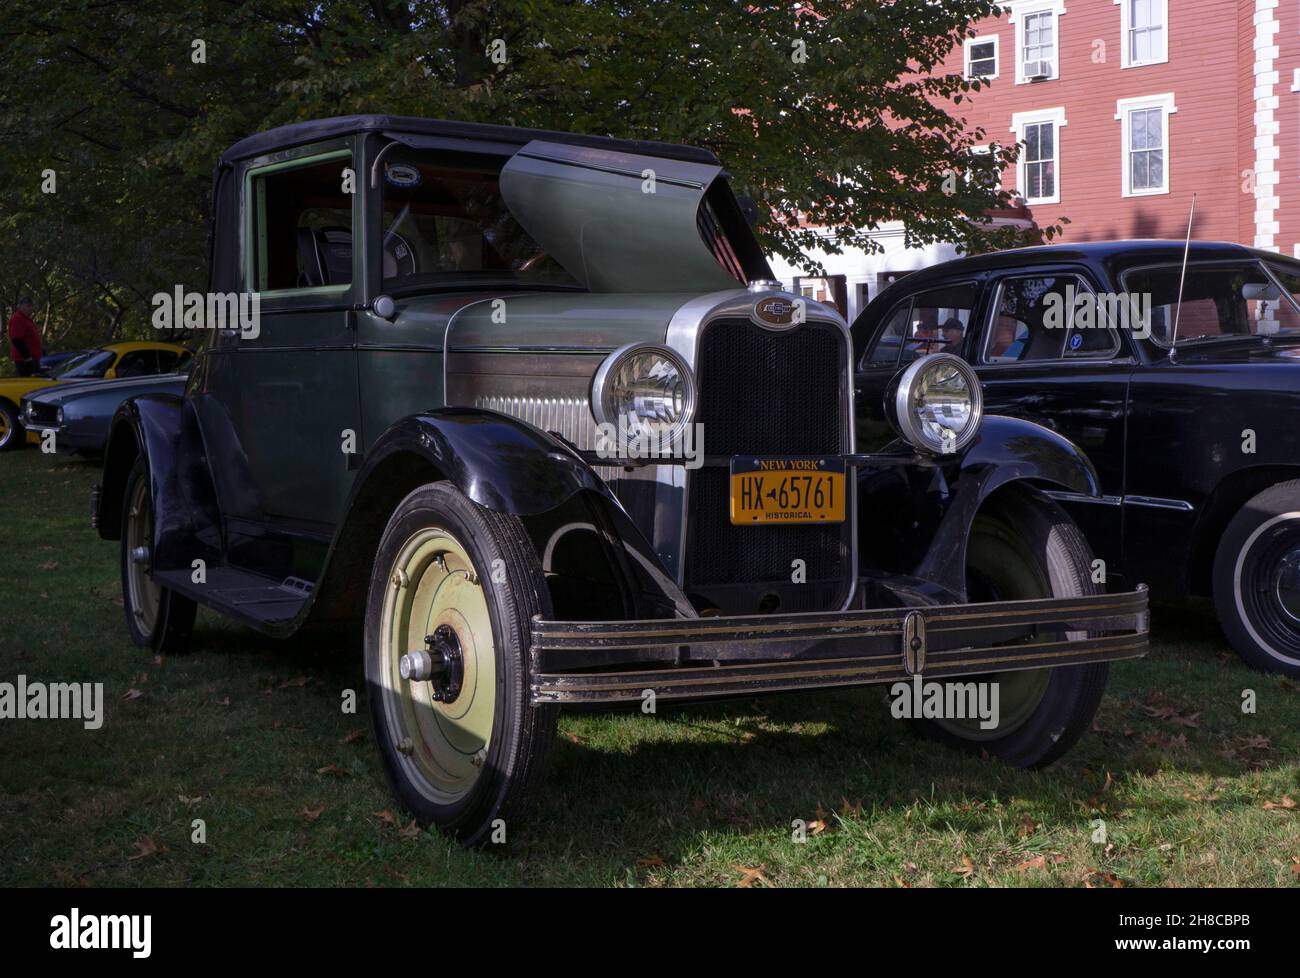 An antique 1928 Chevrolet 2 door sedan parked outside the Bayside Historical Society in Queens at a vintage car show. Stock Photo